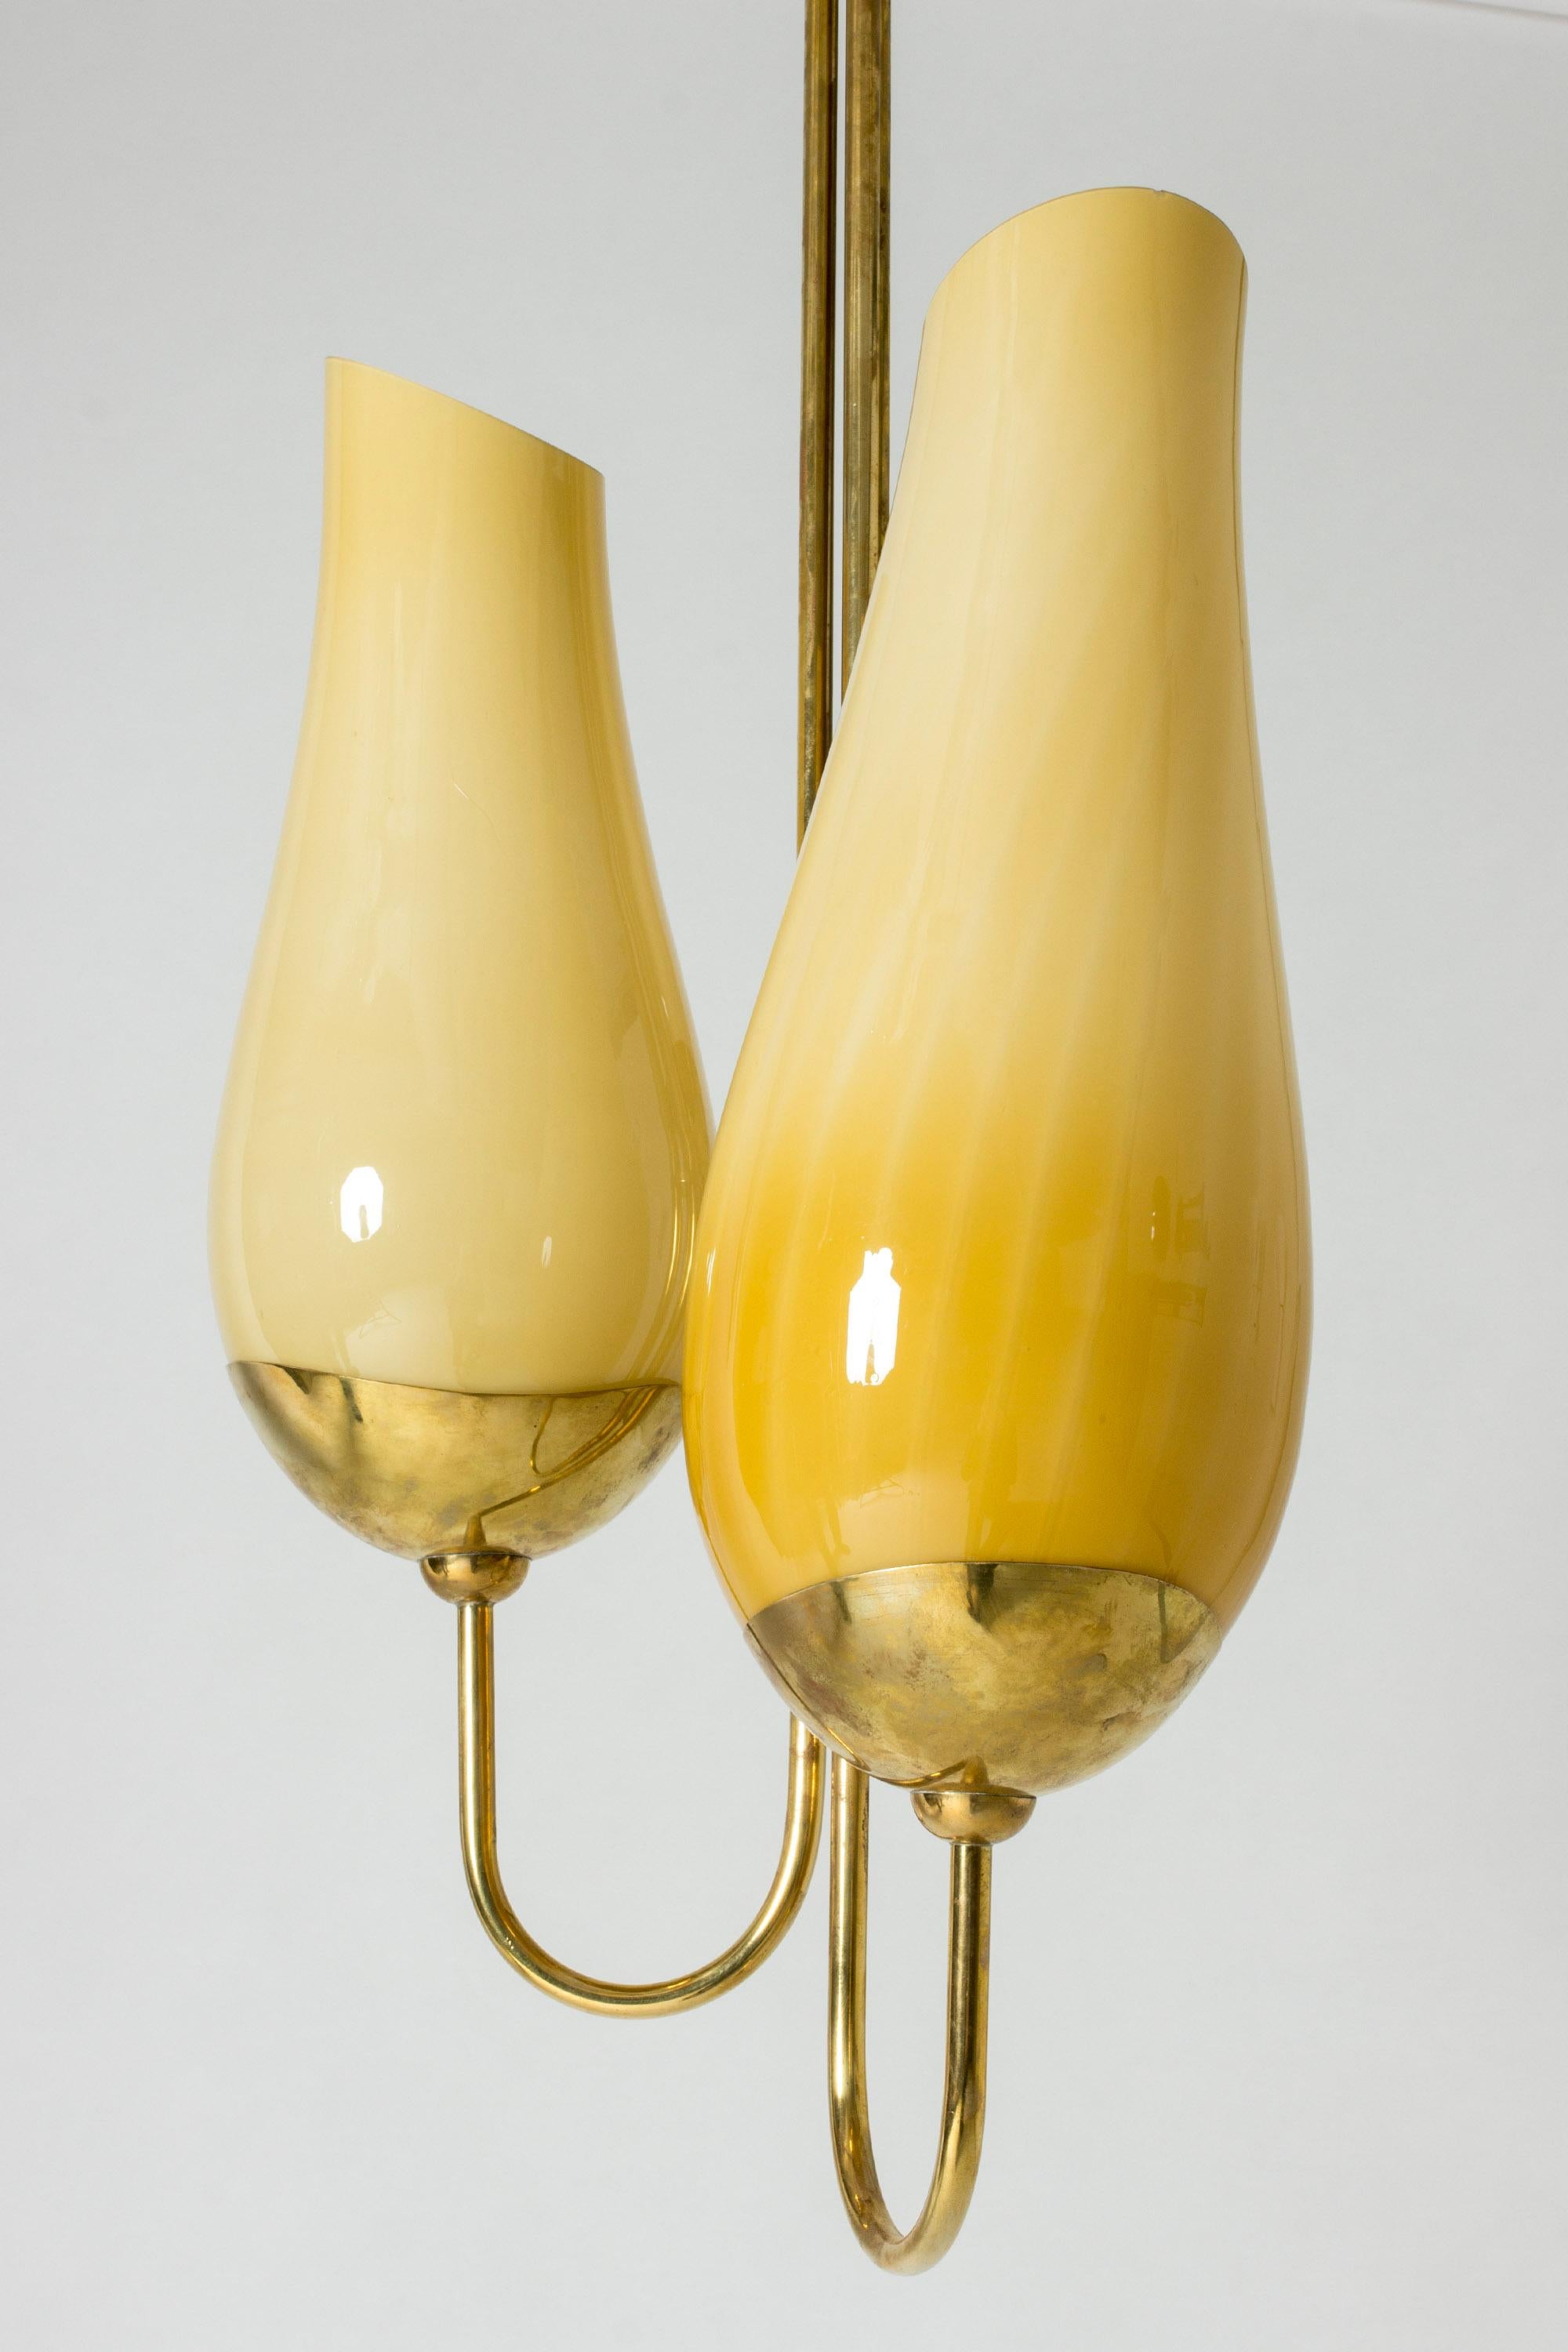 Mid-20th Century Brass and Glass Cgandelier by Paavo Tynell and Gunnel Nyman for Taito Oy, 1940s For Sale